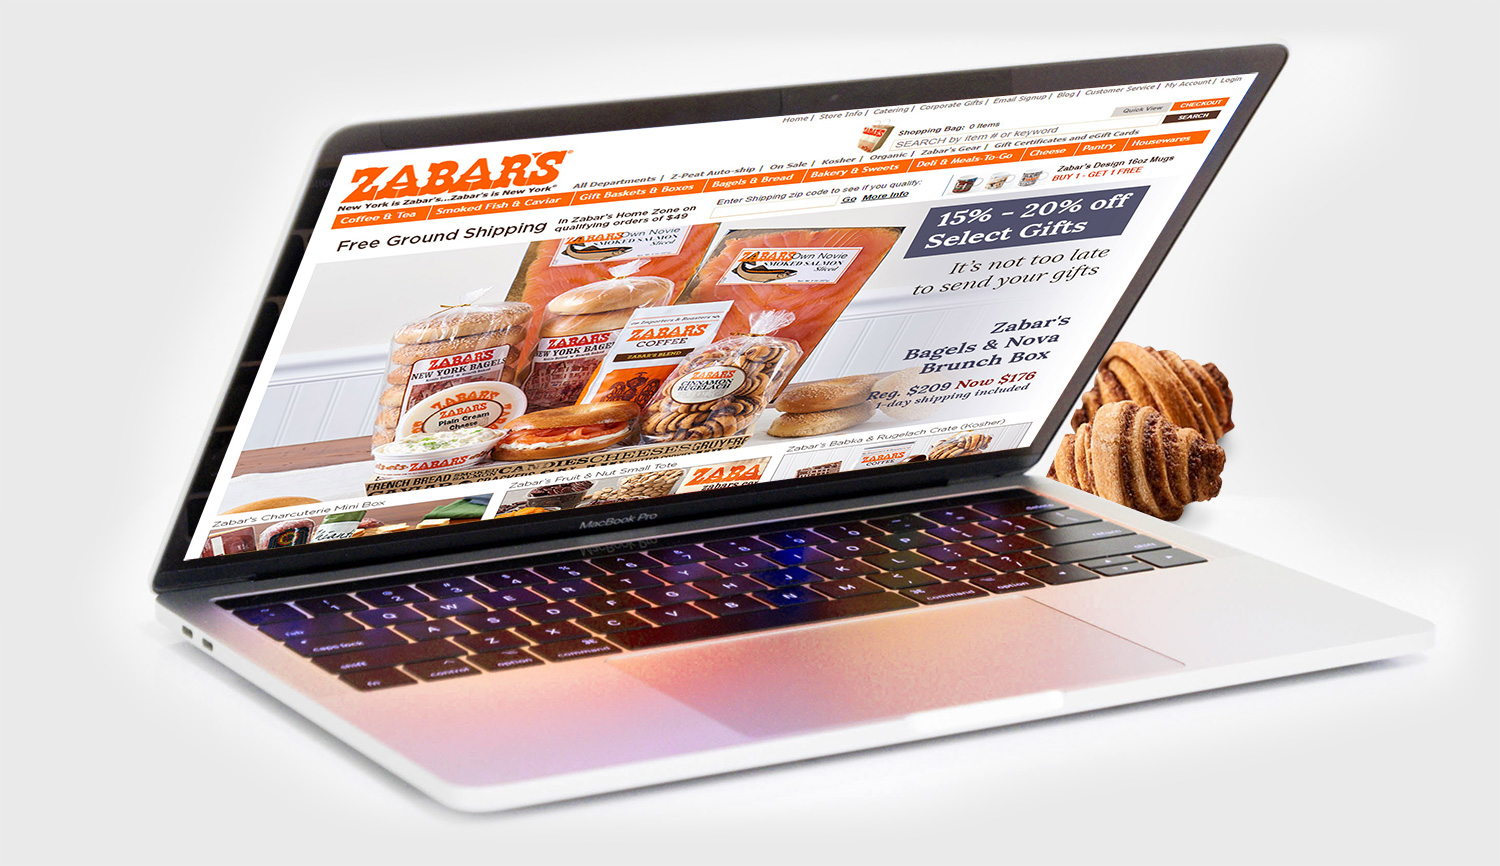 mobizcorp_ecommerce_zabars_salesforce_laptop with the online store open and two mini croissants next to it